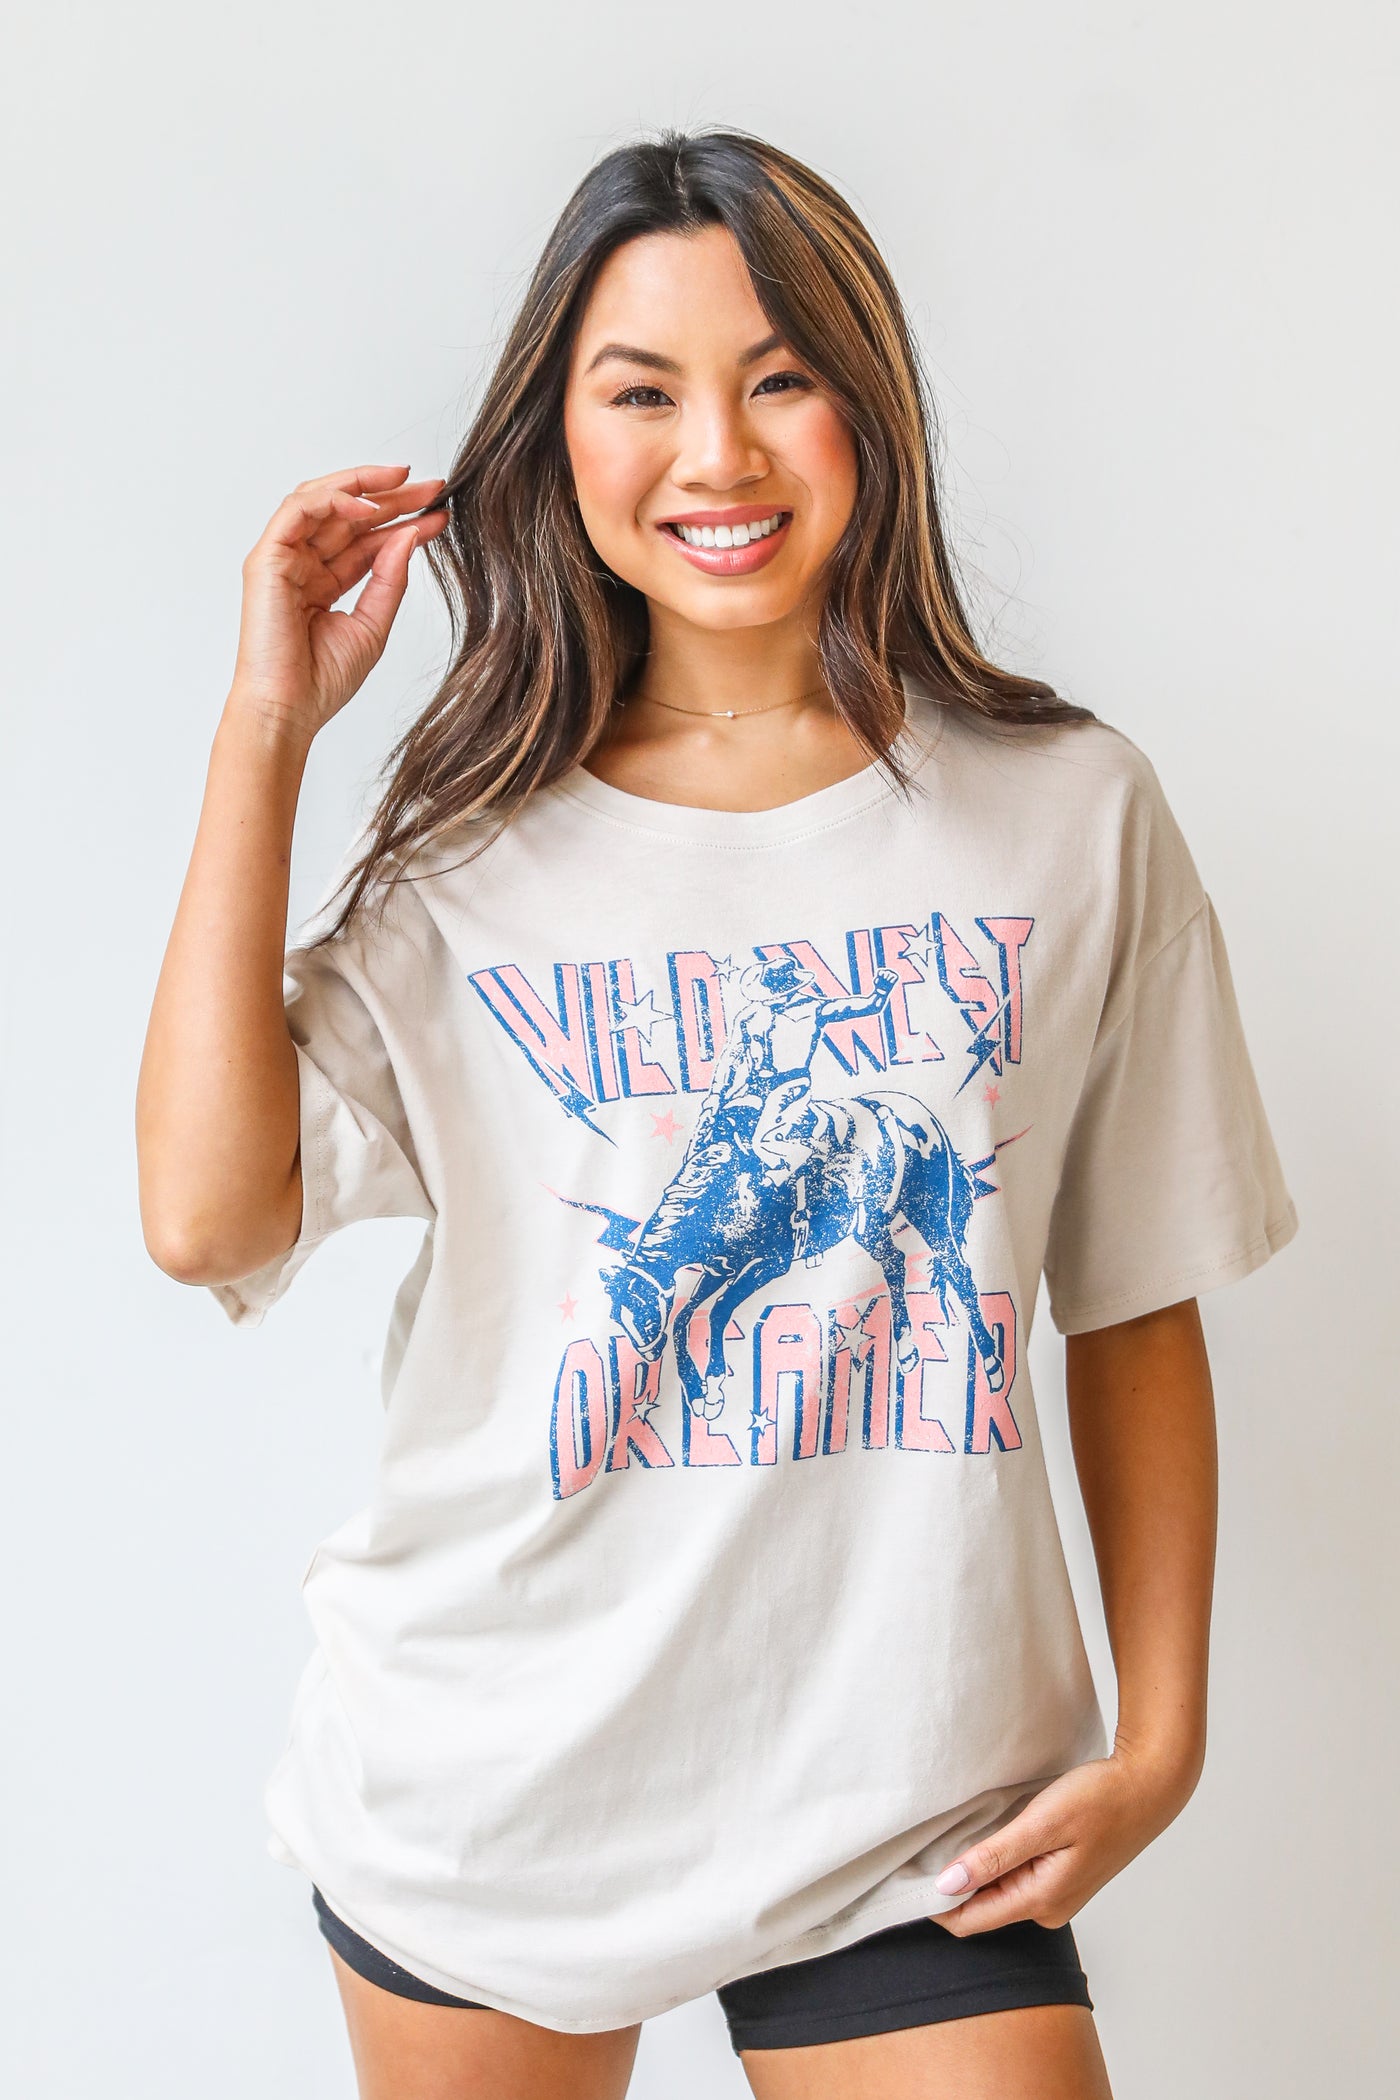 Wild West Dreamer Graphic Tee front view